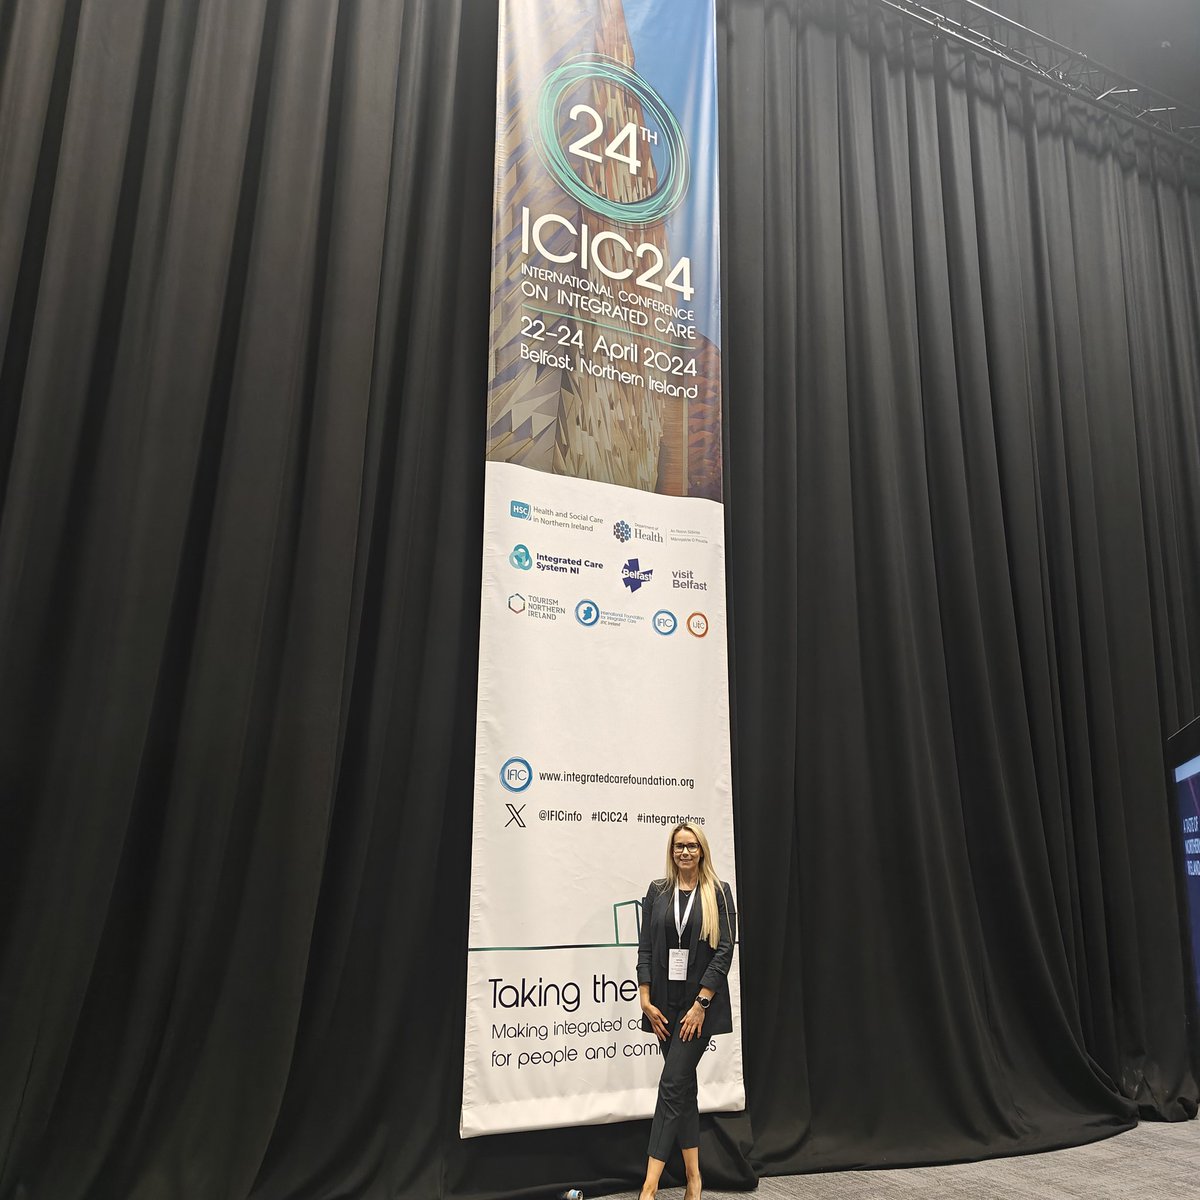 Thank you to the @IFICInfo team for organising such an informative and motivating conference! The agenda was phenomenal! Looking forward to the next one!! #integratedcare #ICIC24 #collaboration #innovation